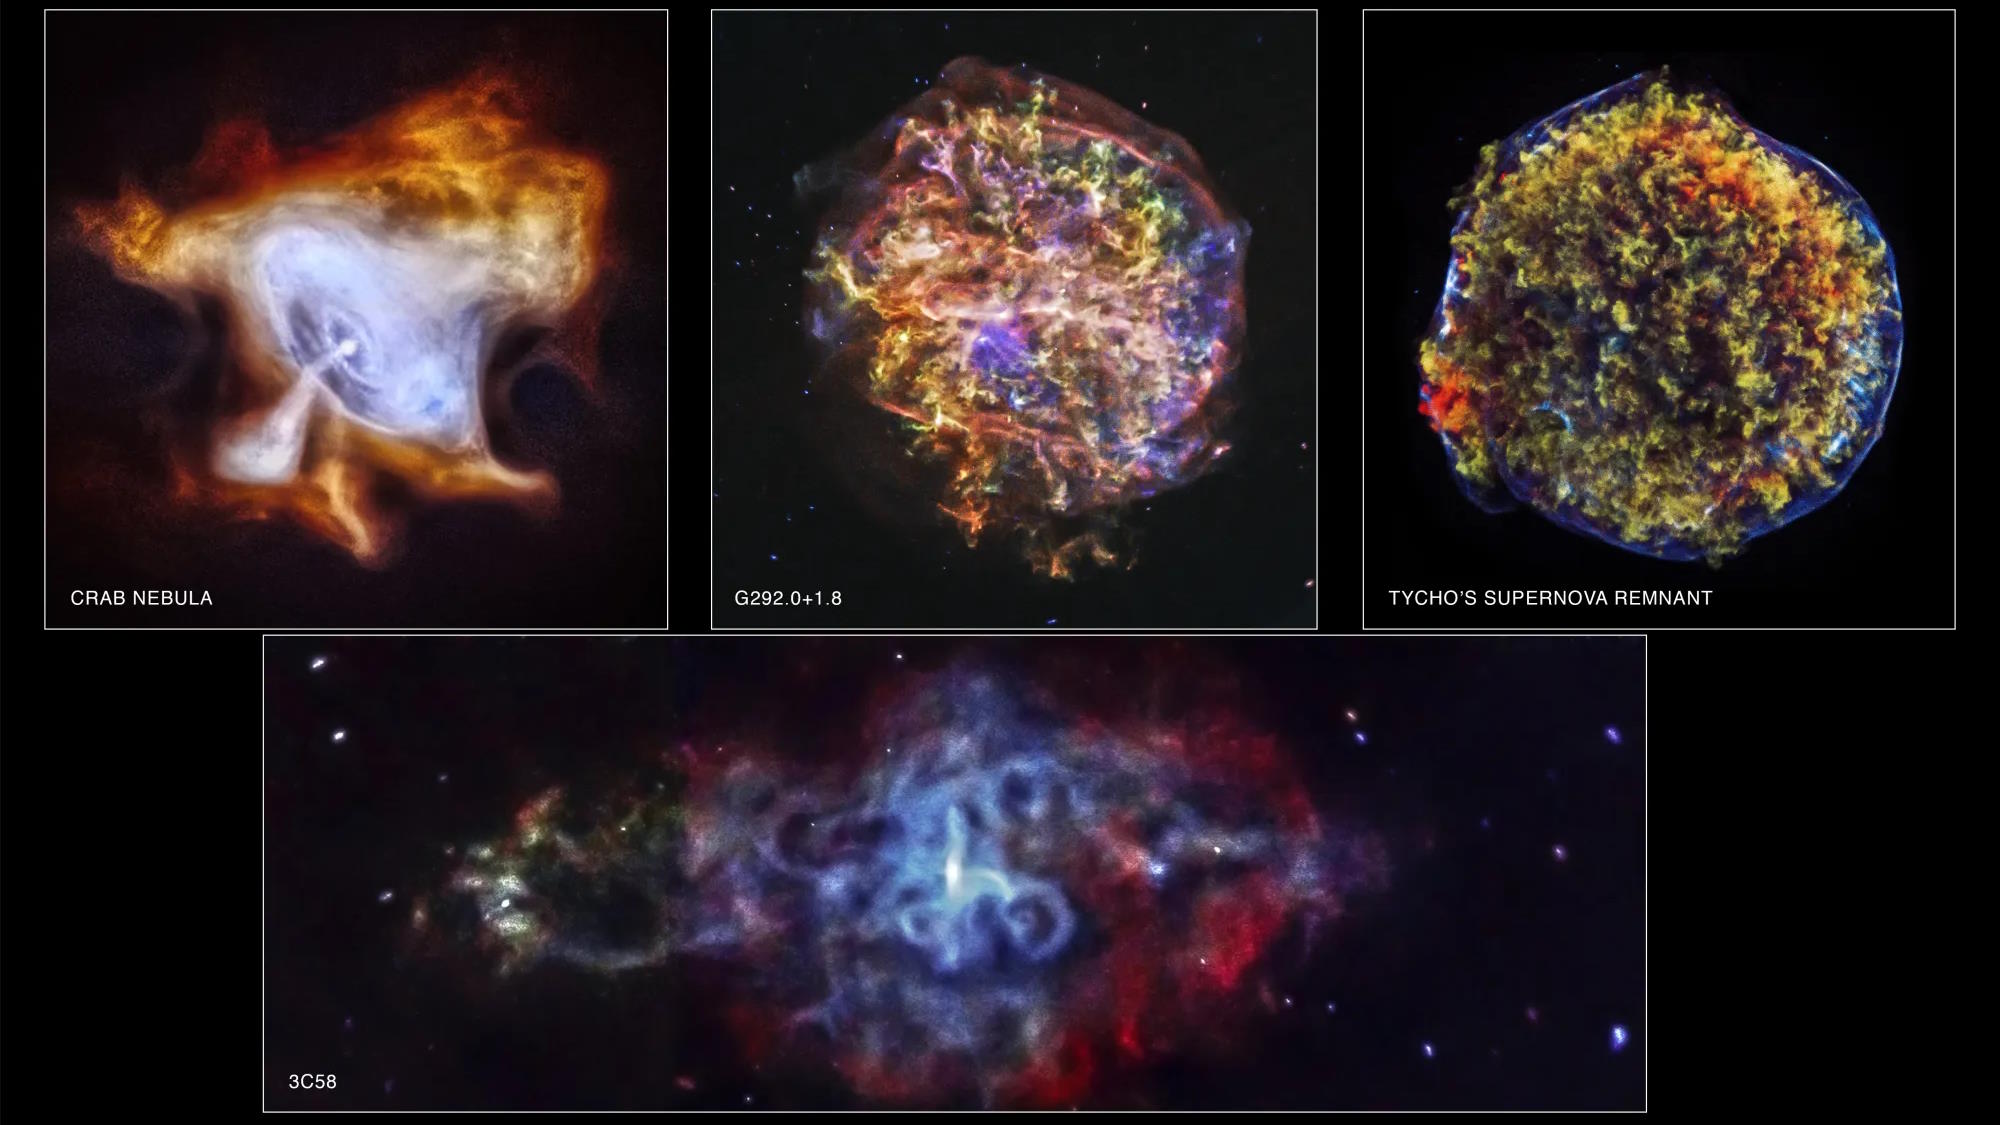 Four different images of supernova remnants from NASA's Chandra X-ray observatory